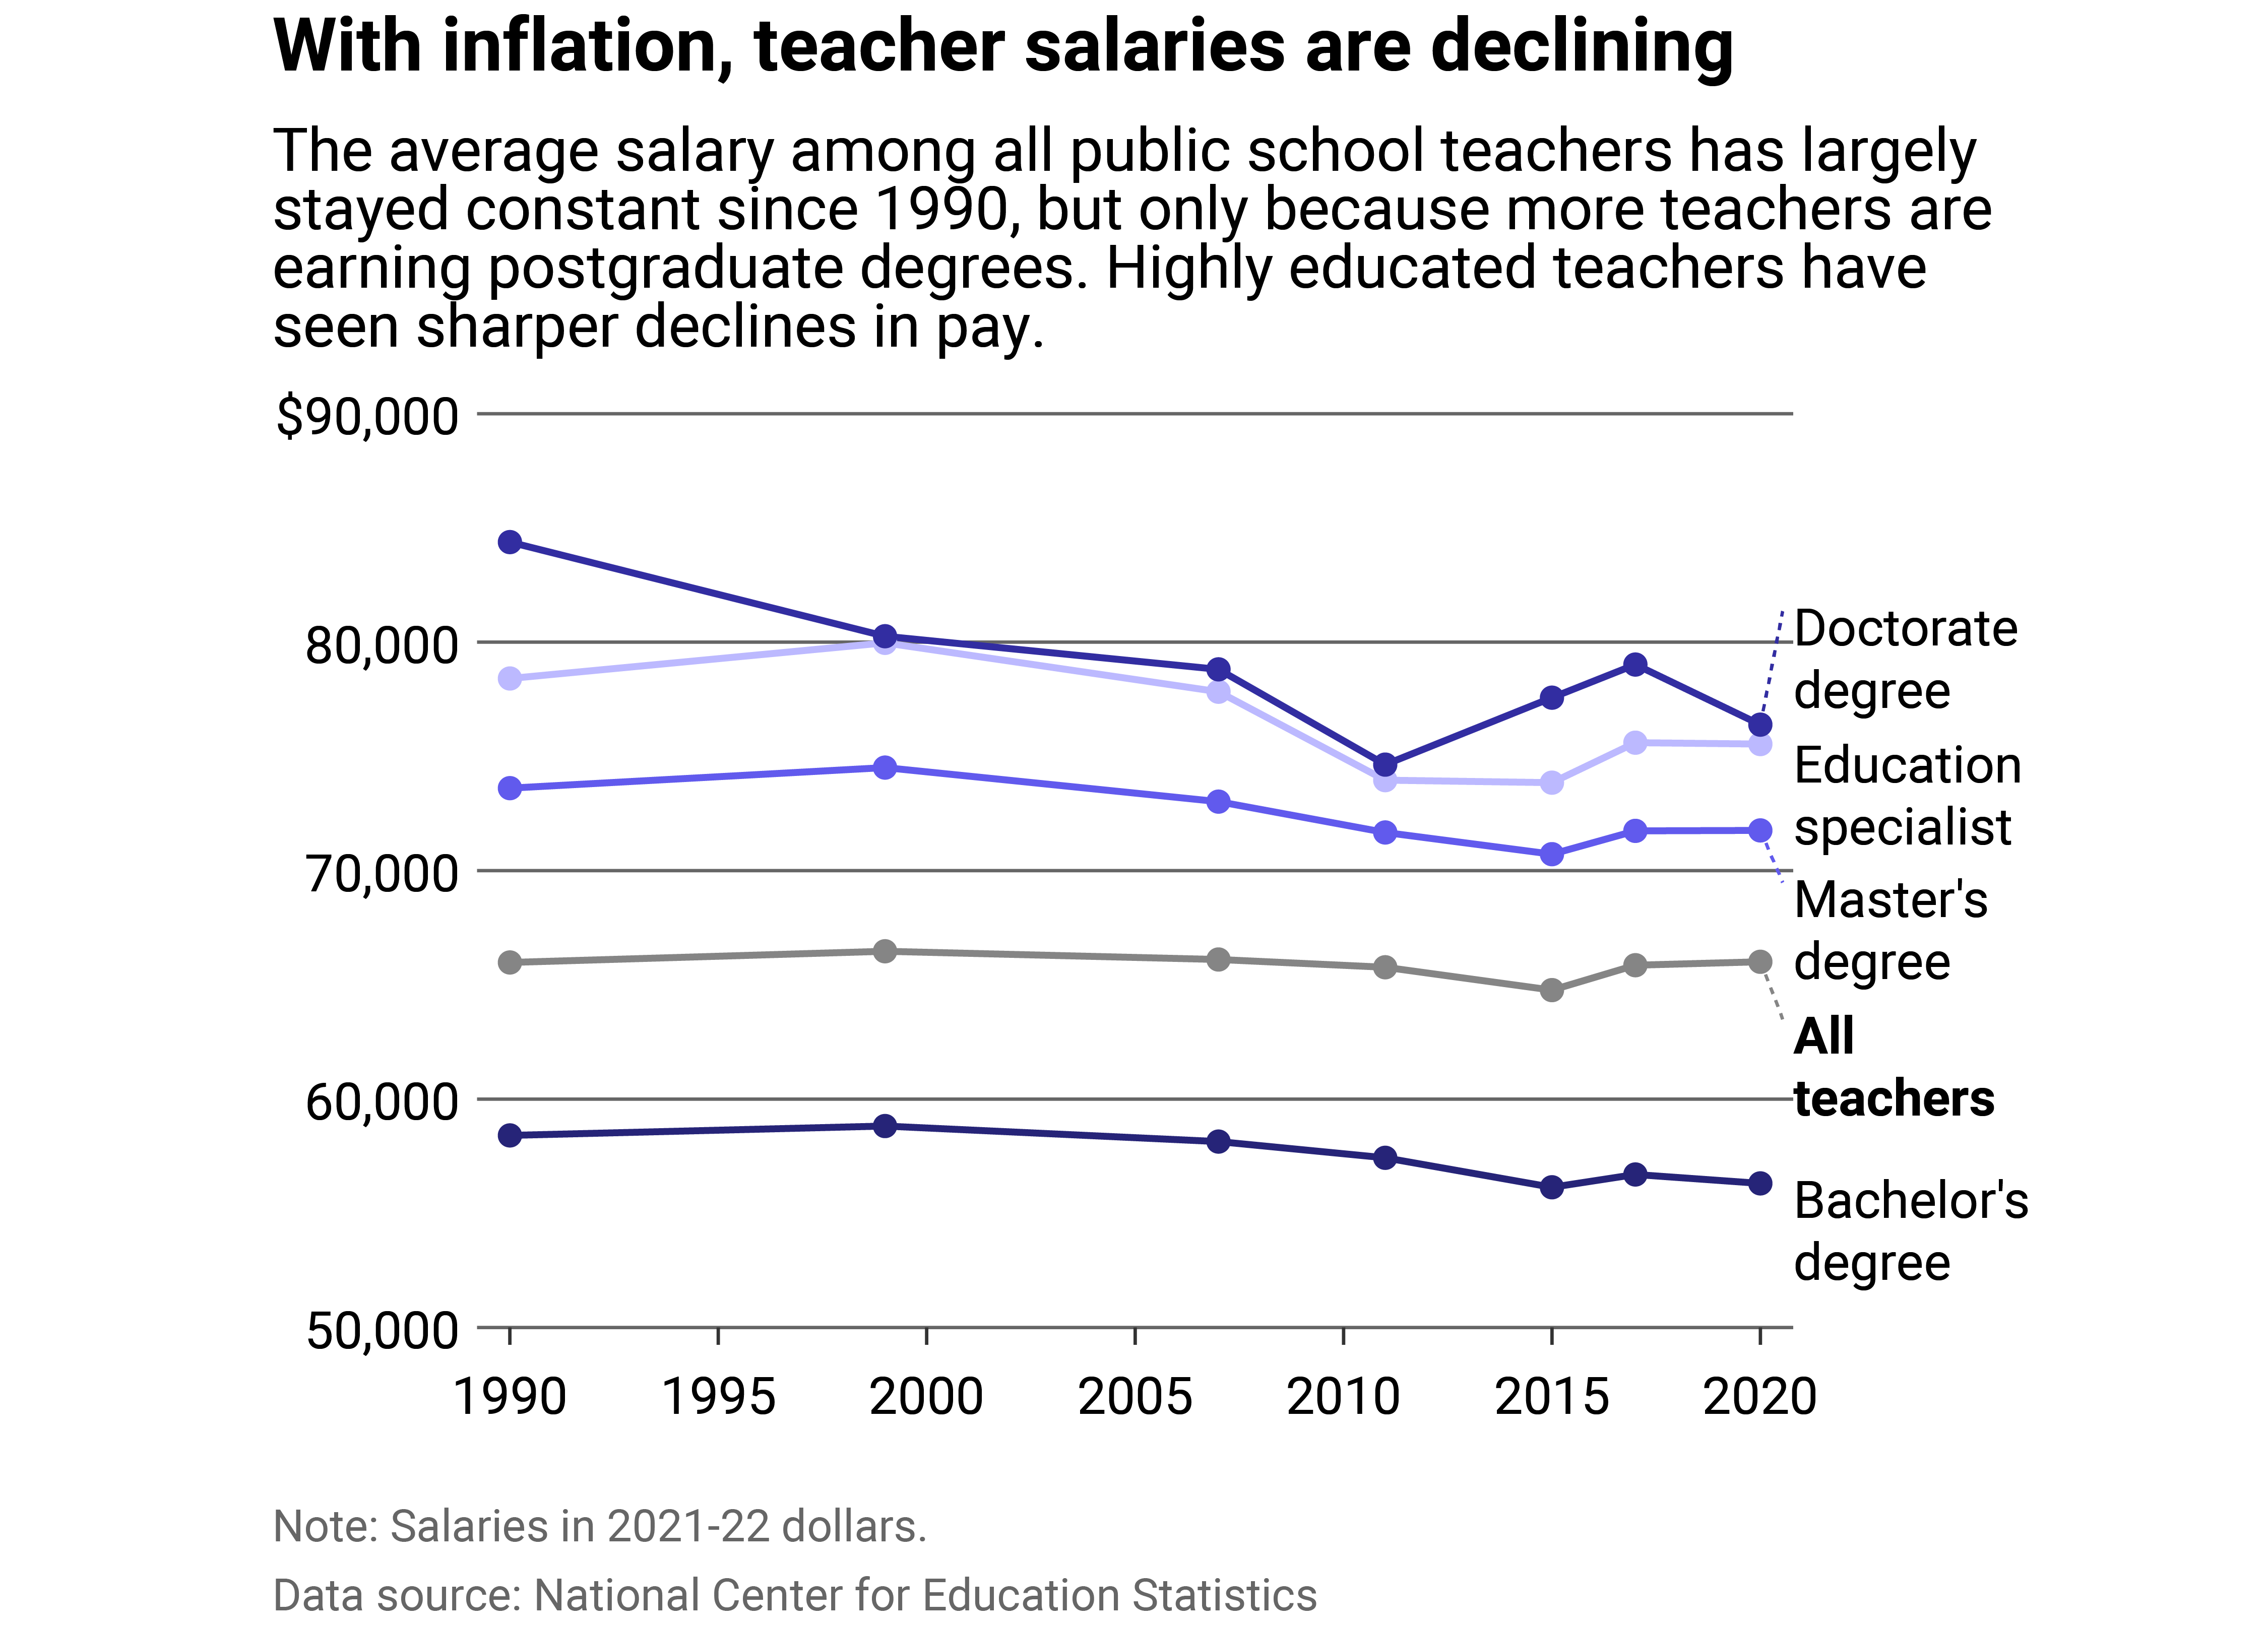 Line chart showing that when adjusted for inflation, teacher salaries are declining. The average salary among all teachers has largely stayed constant since 1990, but only because more teachers are earning post-baccalaureate degrees. Highly educated teachers have seen sharper declines in pay.